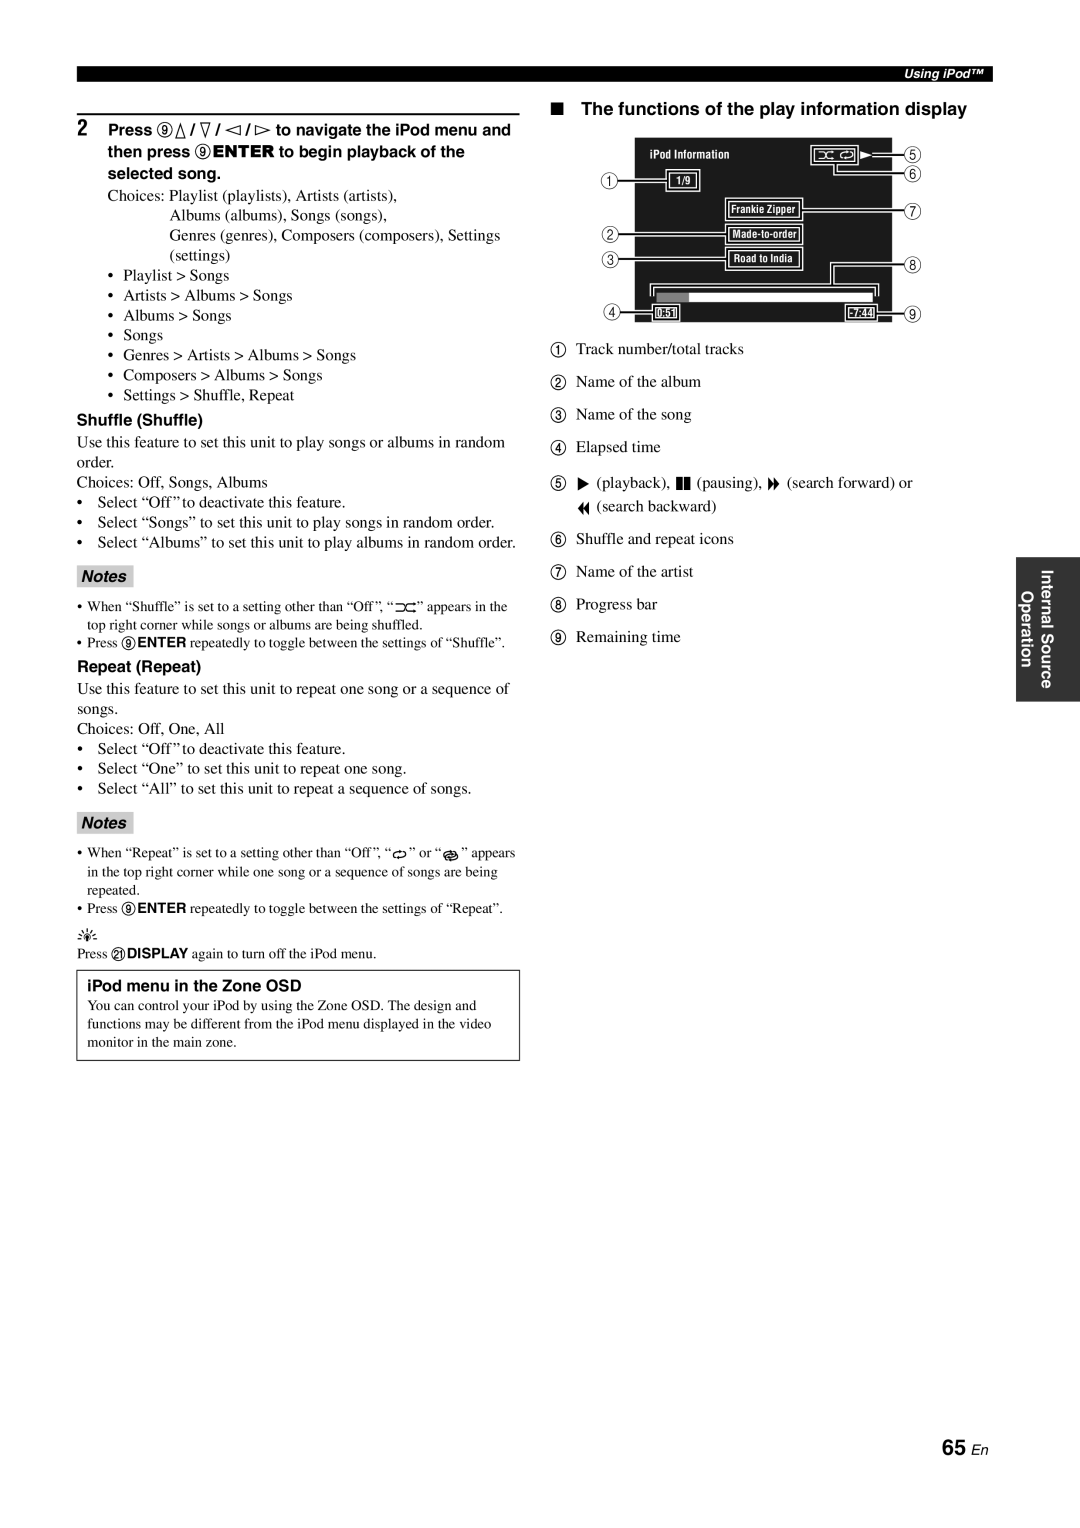 Yamaha DSP-Z11 owner manual 65 En, The functions of the play information display, Notes, Operation 